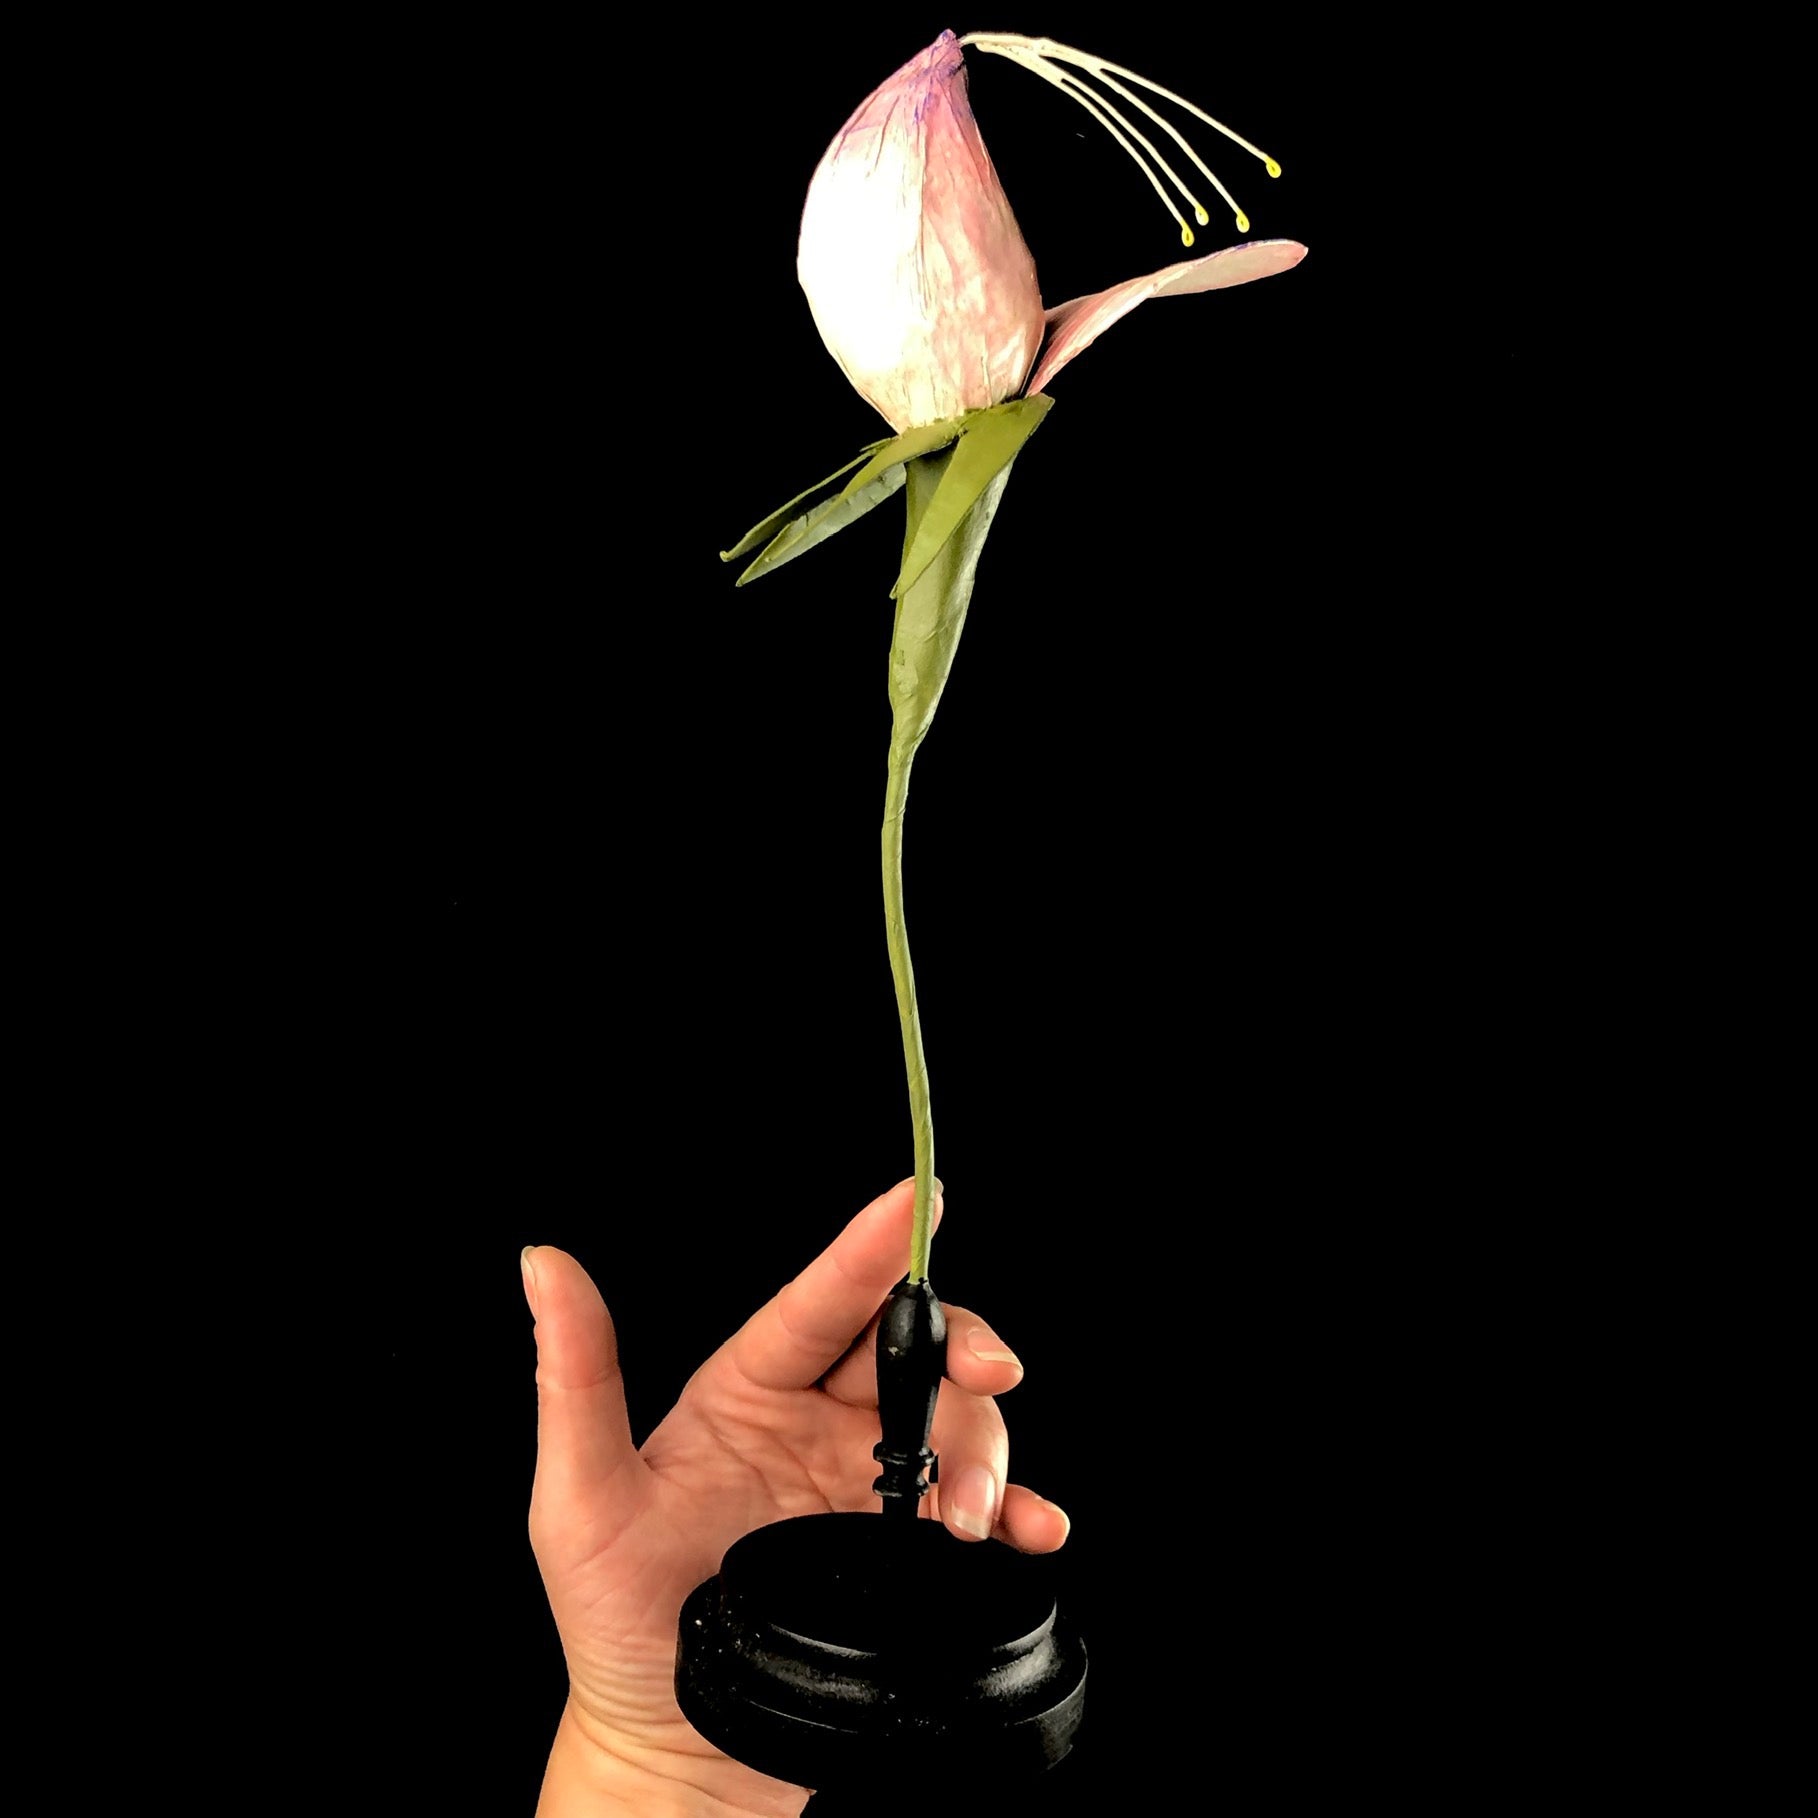 Pink Flower Study Model in hand for size reference